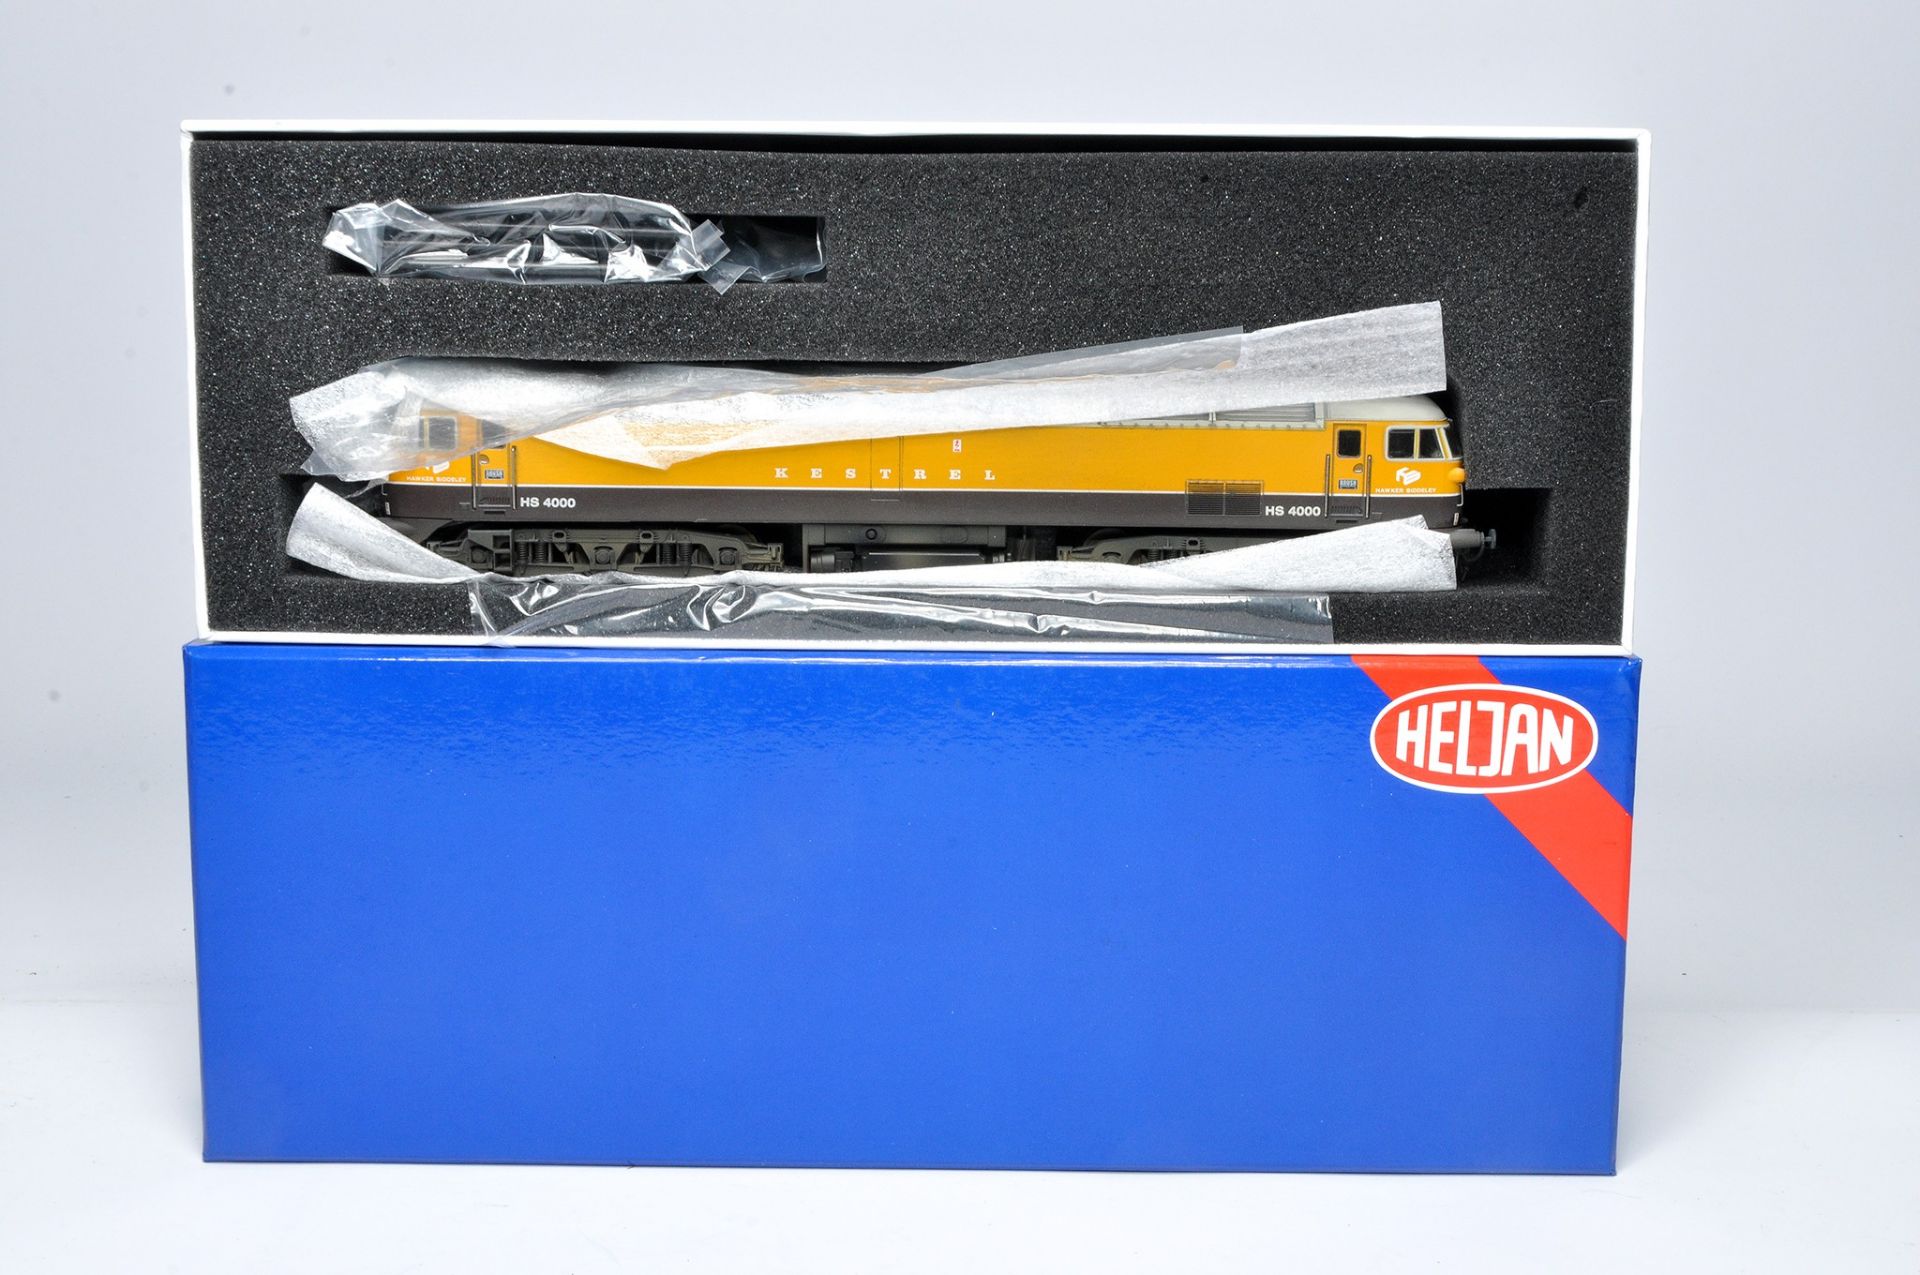 Heljan Model Railway comprising locomotive issue Kestrel 4000 Limited Edition. Looks to be without